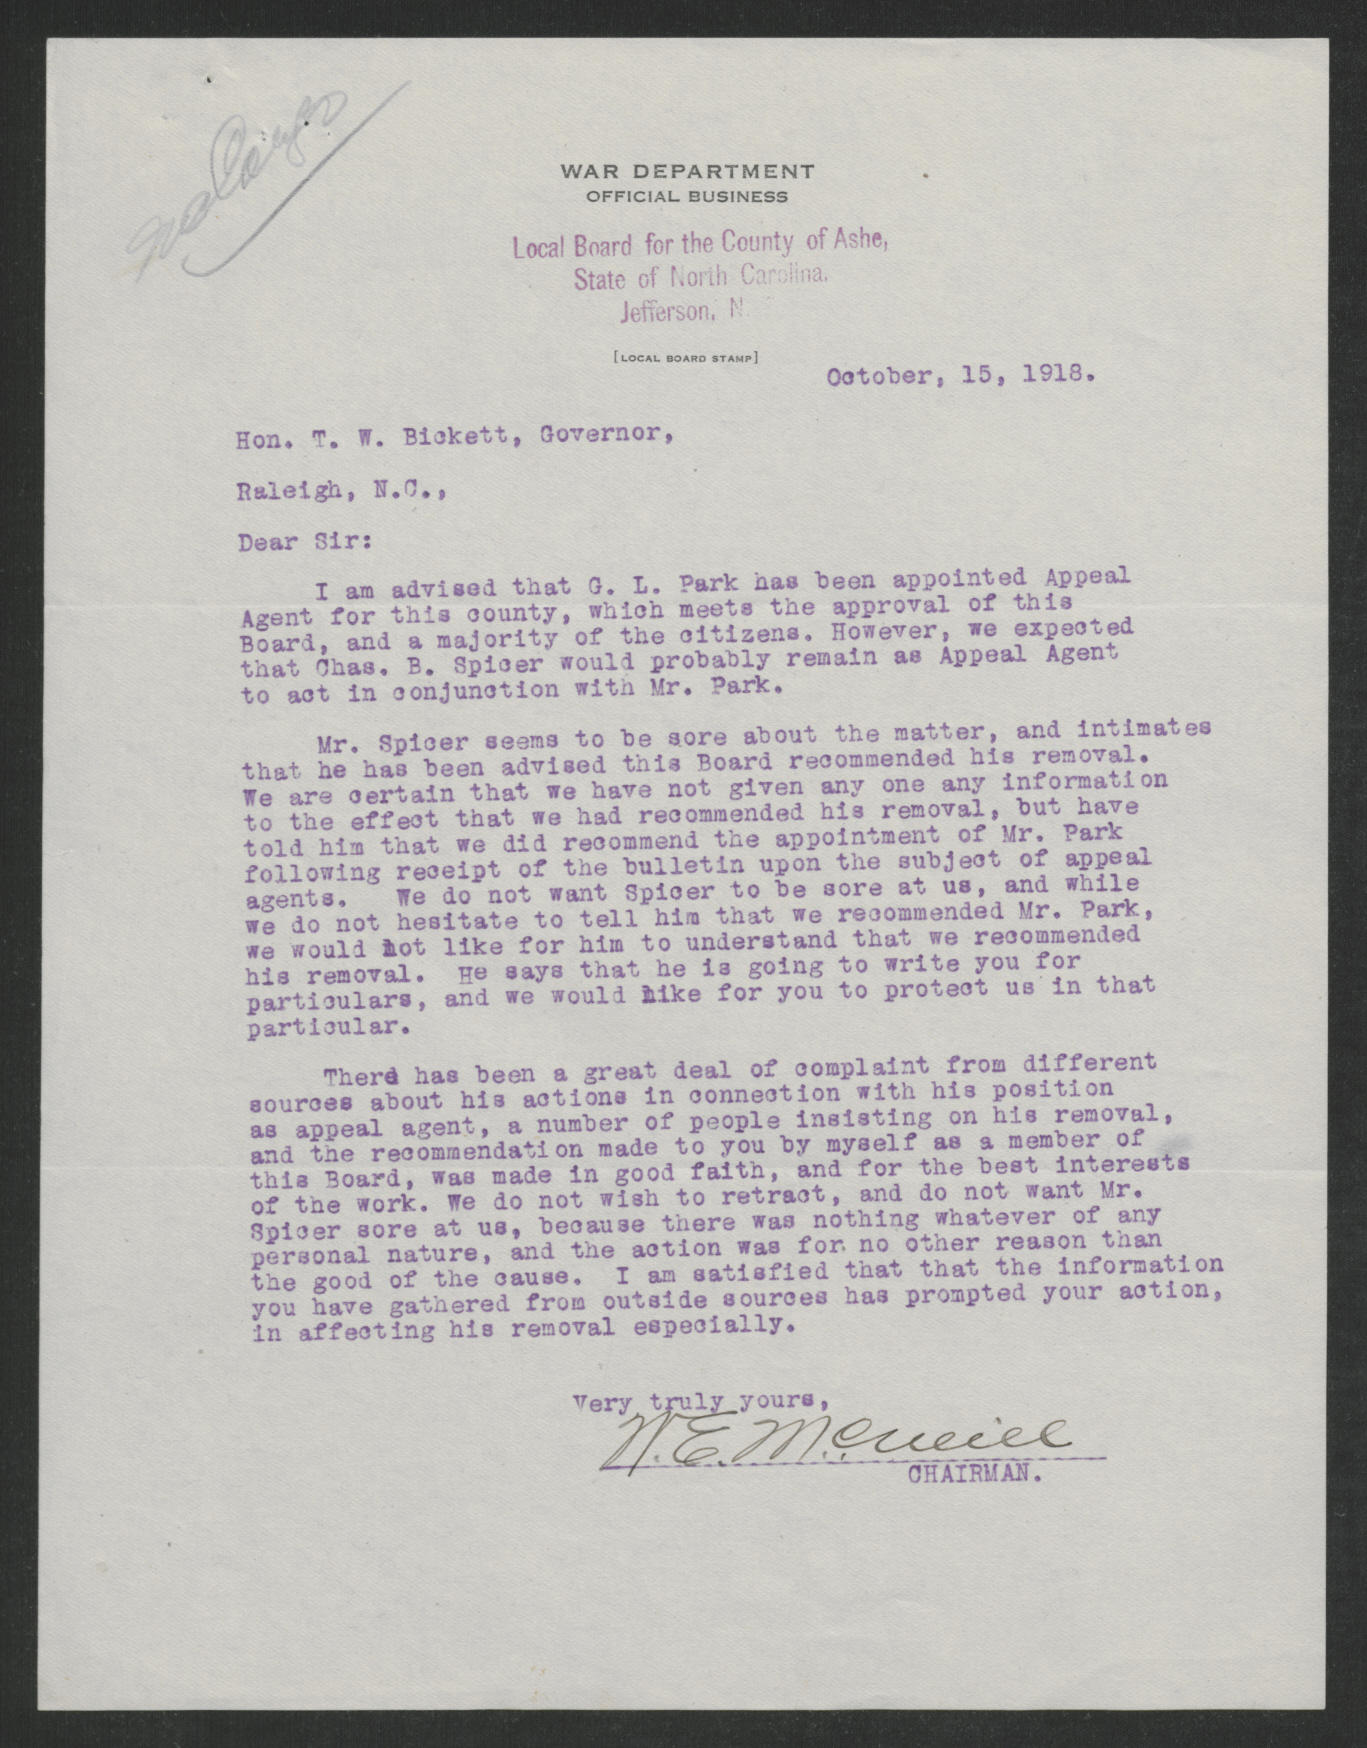 Letter from Wiley E. McNeill to Thomas W. Bickett, October 15, 1918